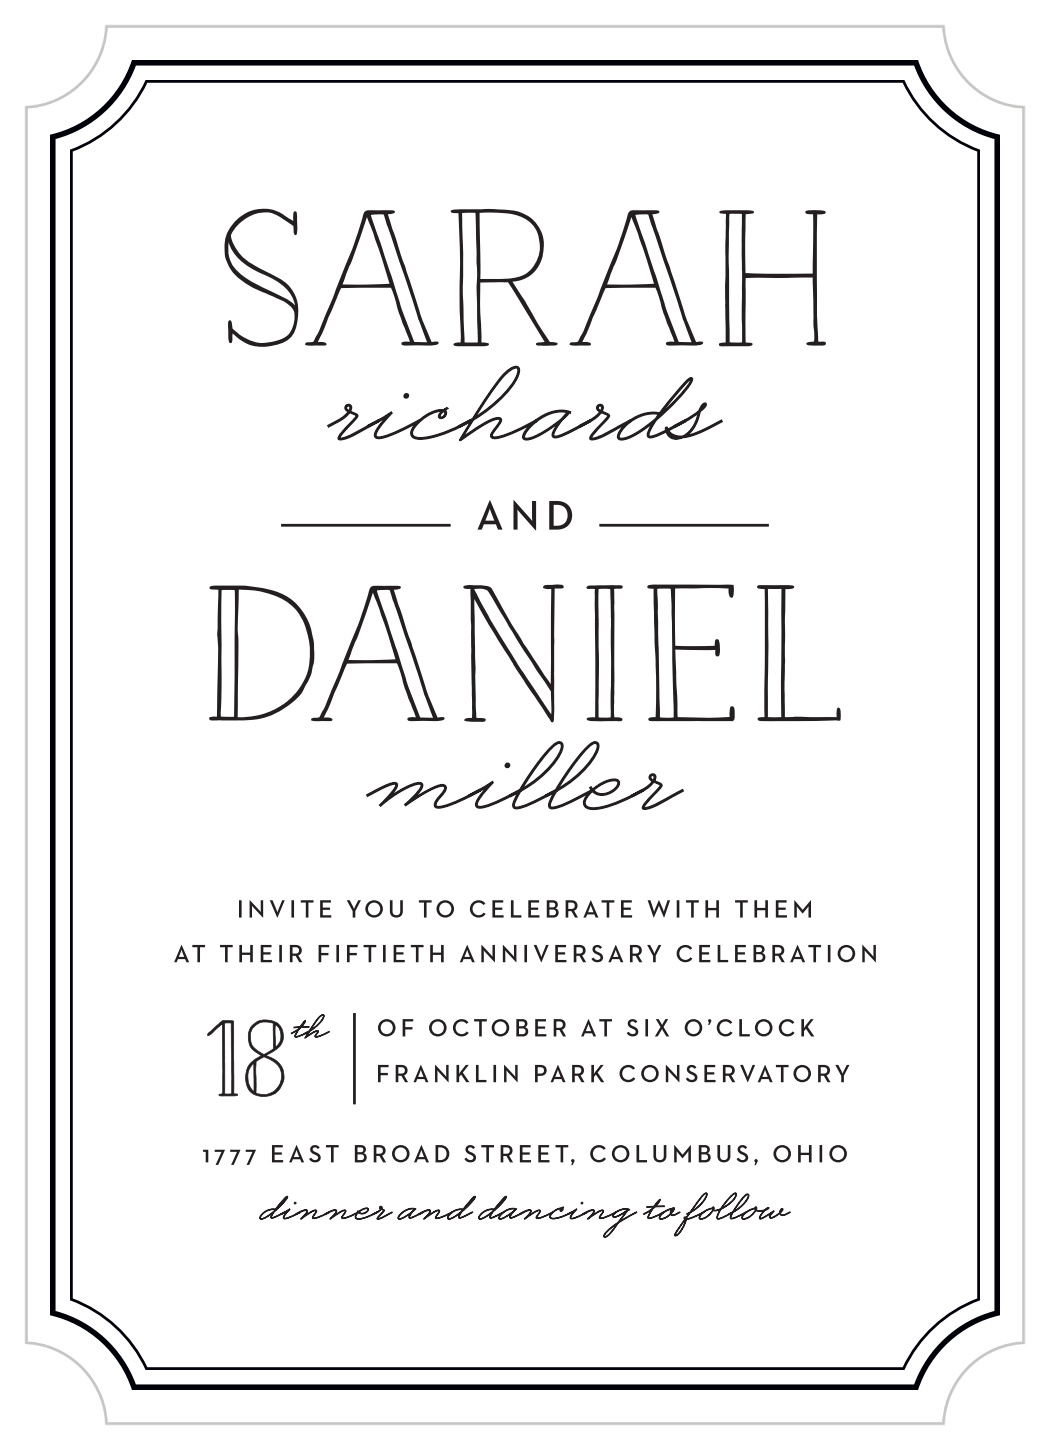 Ticket Frame Vow Renewal Invitations